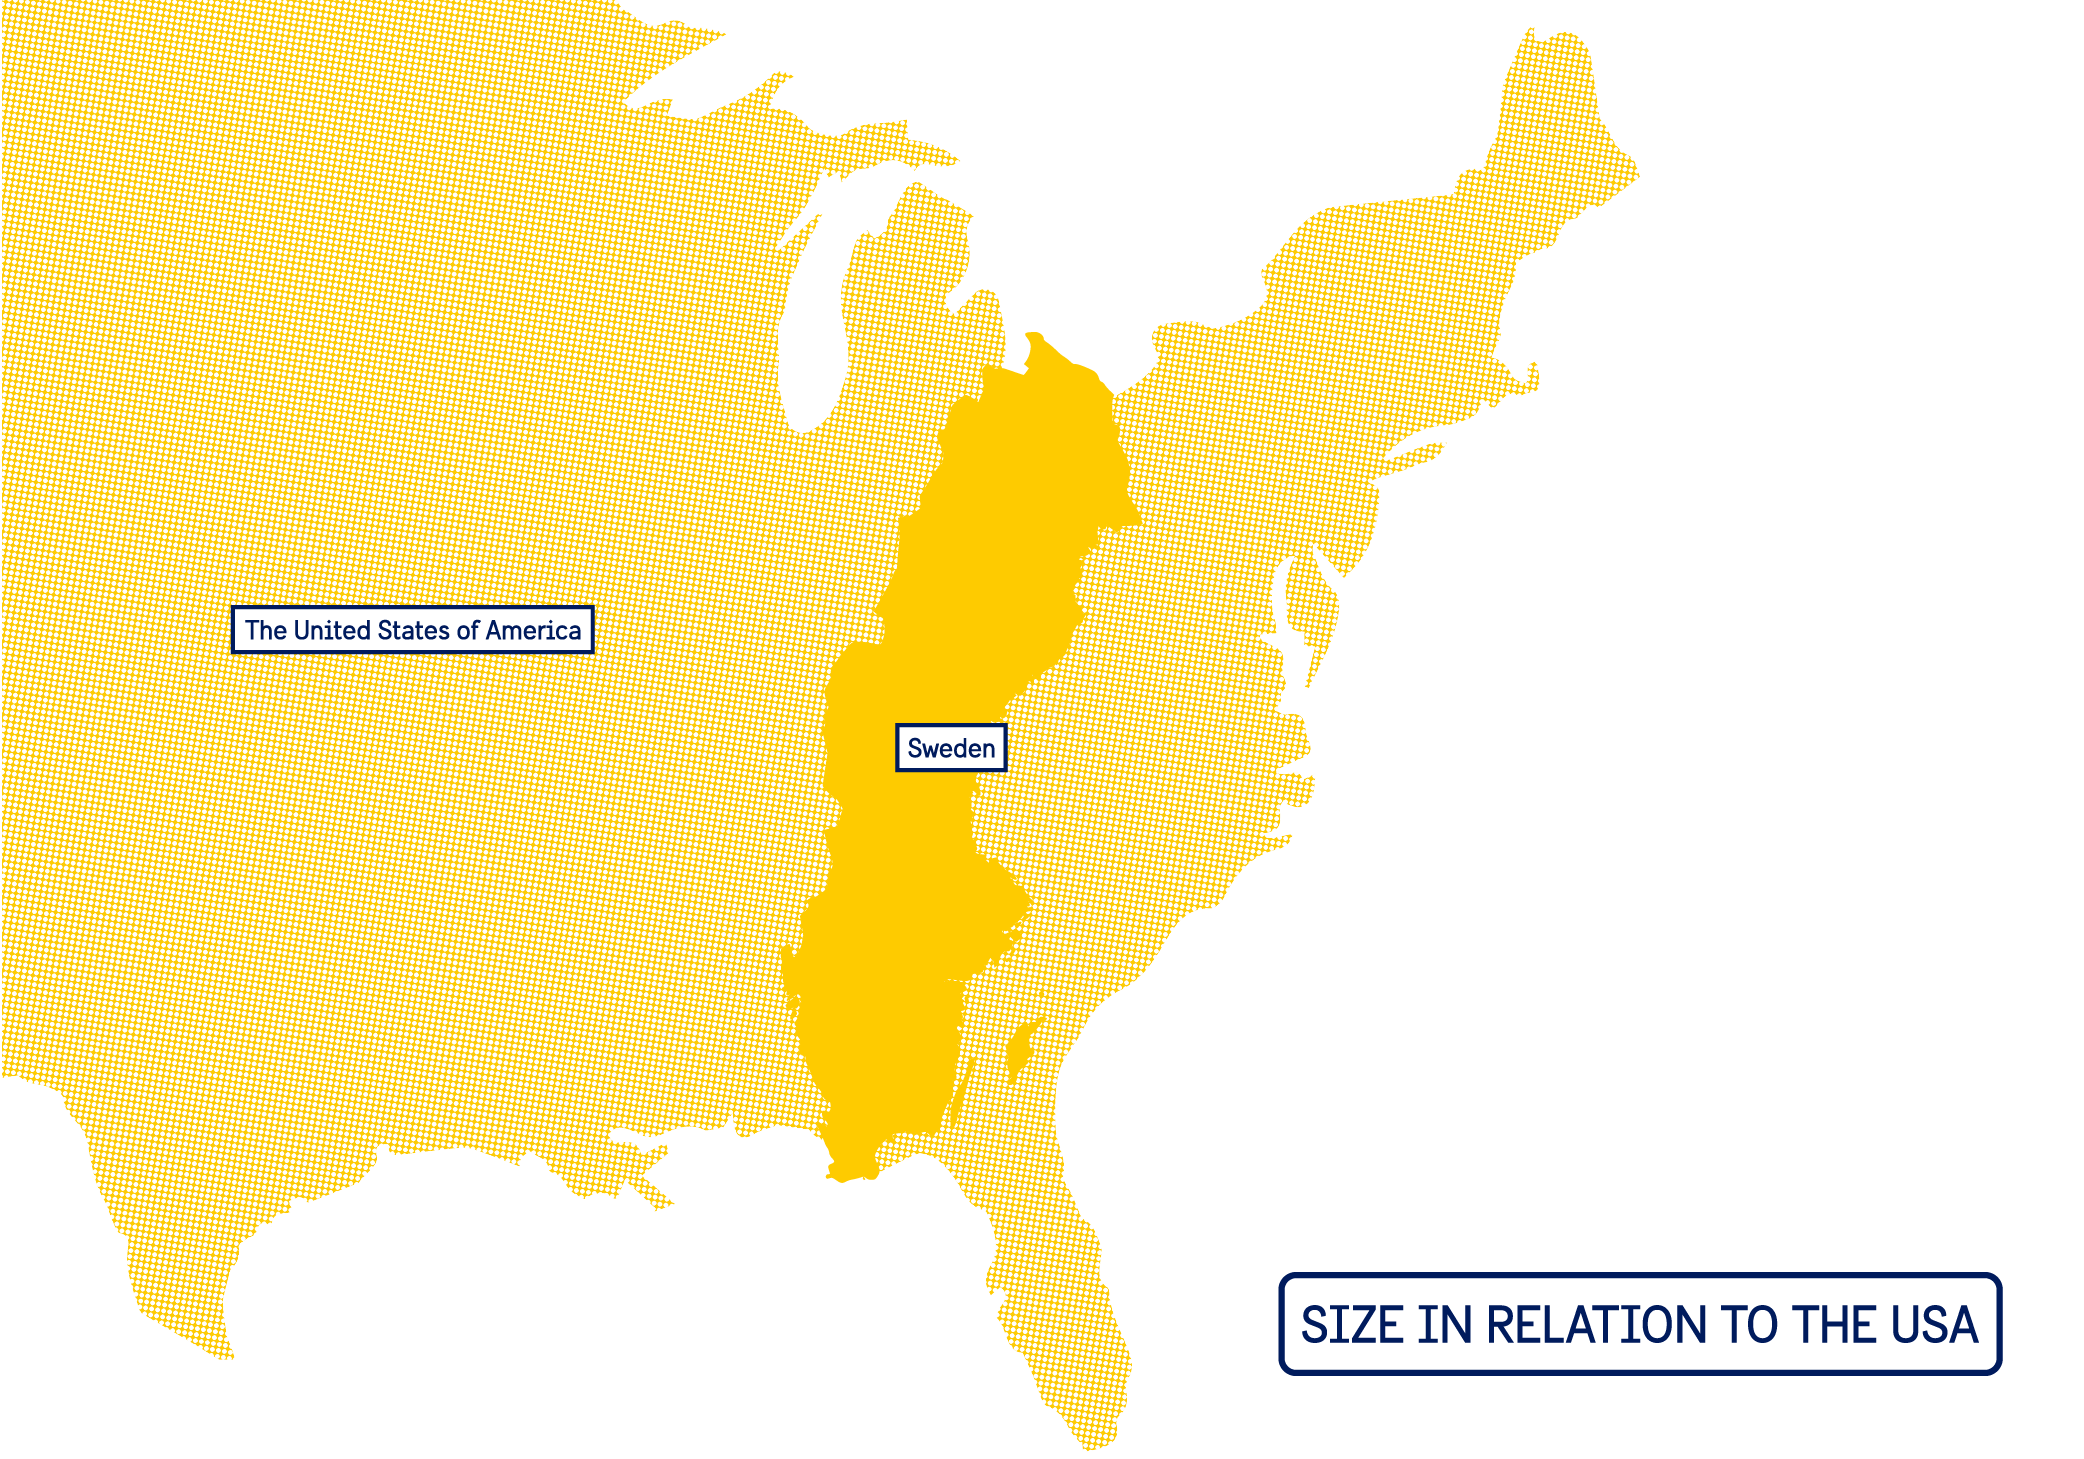 sweden's and usa's size compared